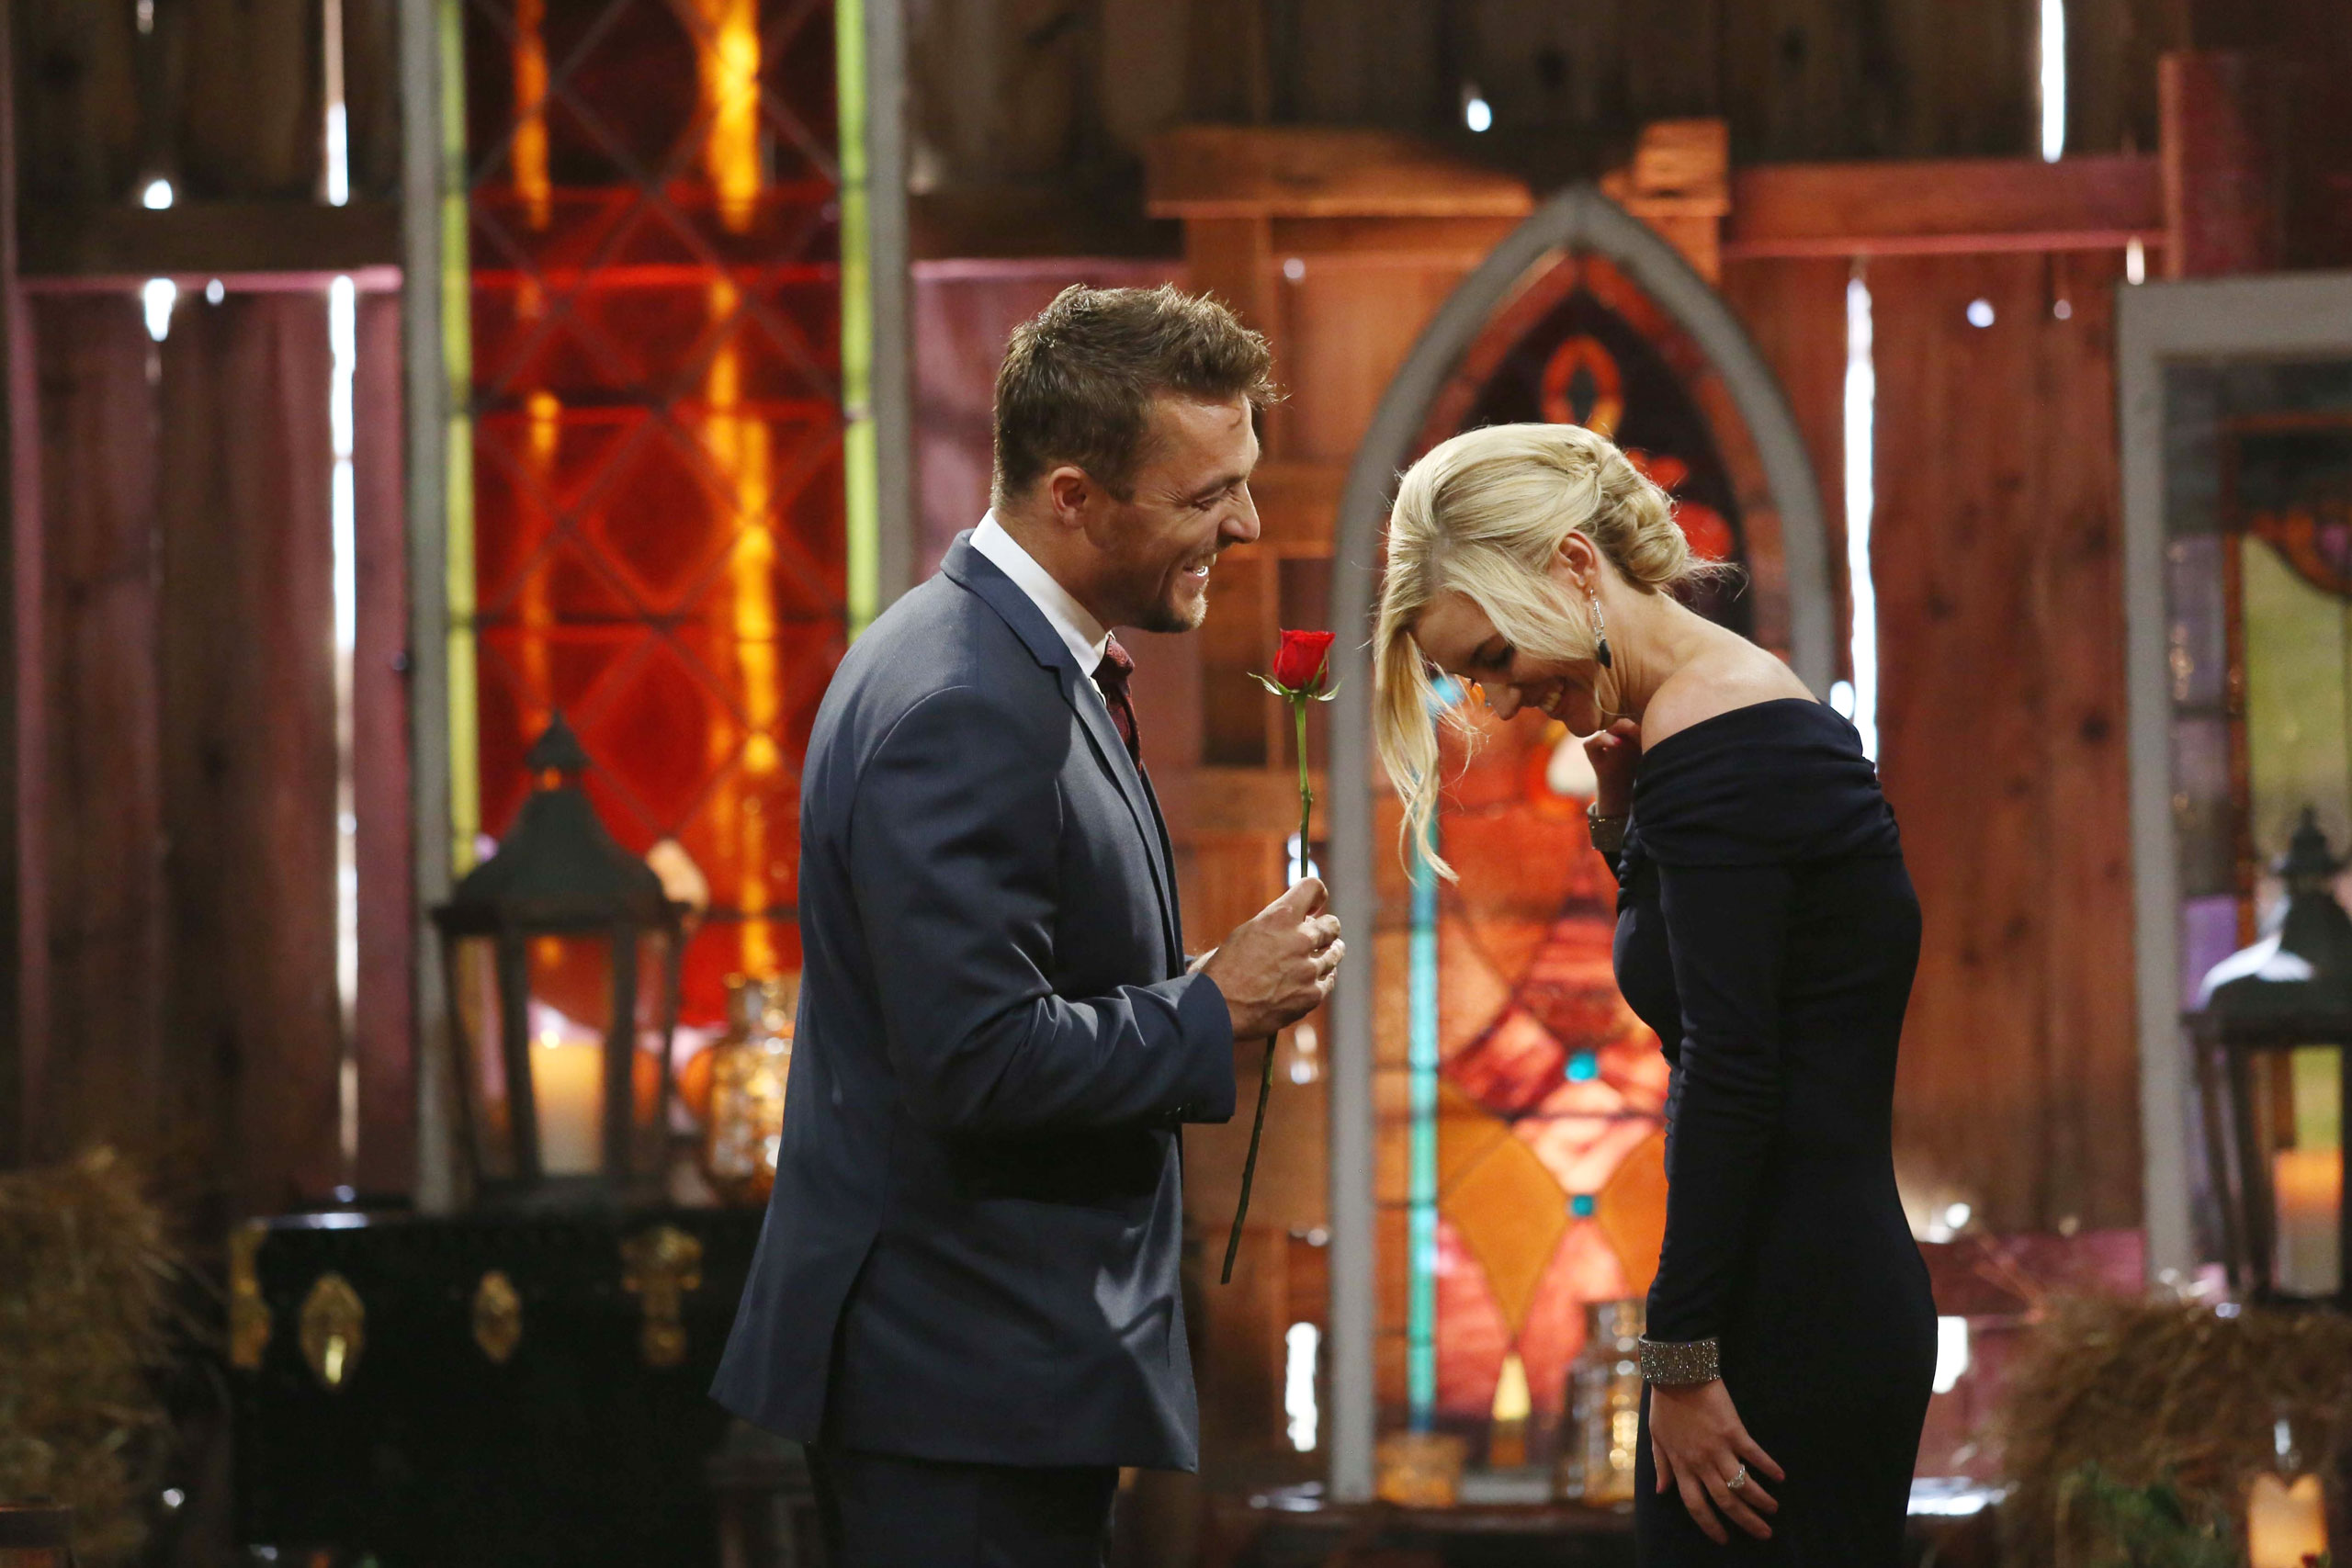 Chris Soules proposes to Whitney Bischoff on the Season Finale of "The Bachelor," on March 9, 2015.